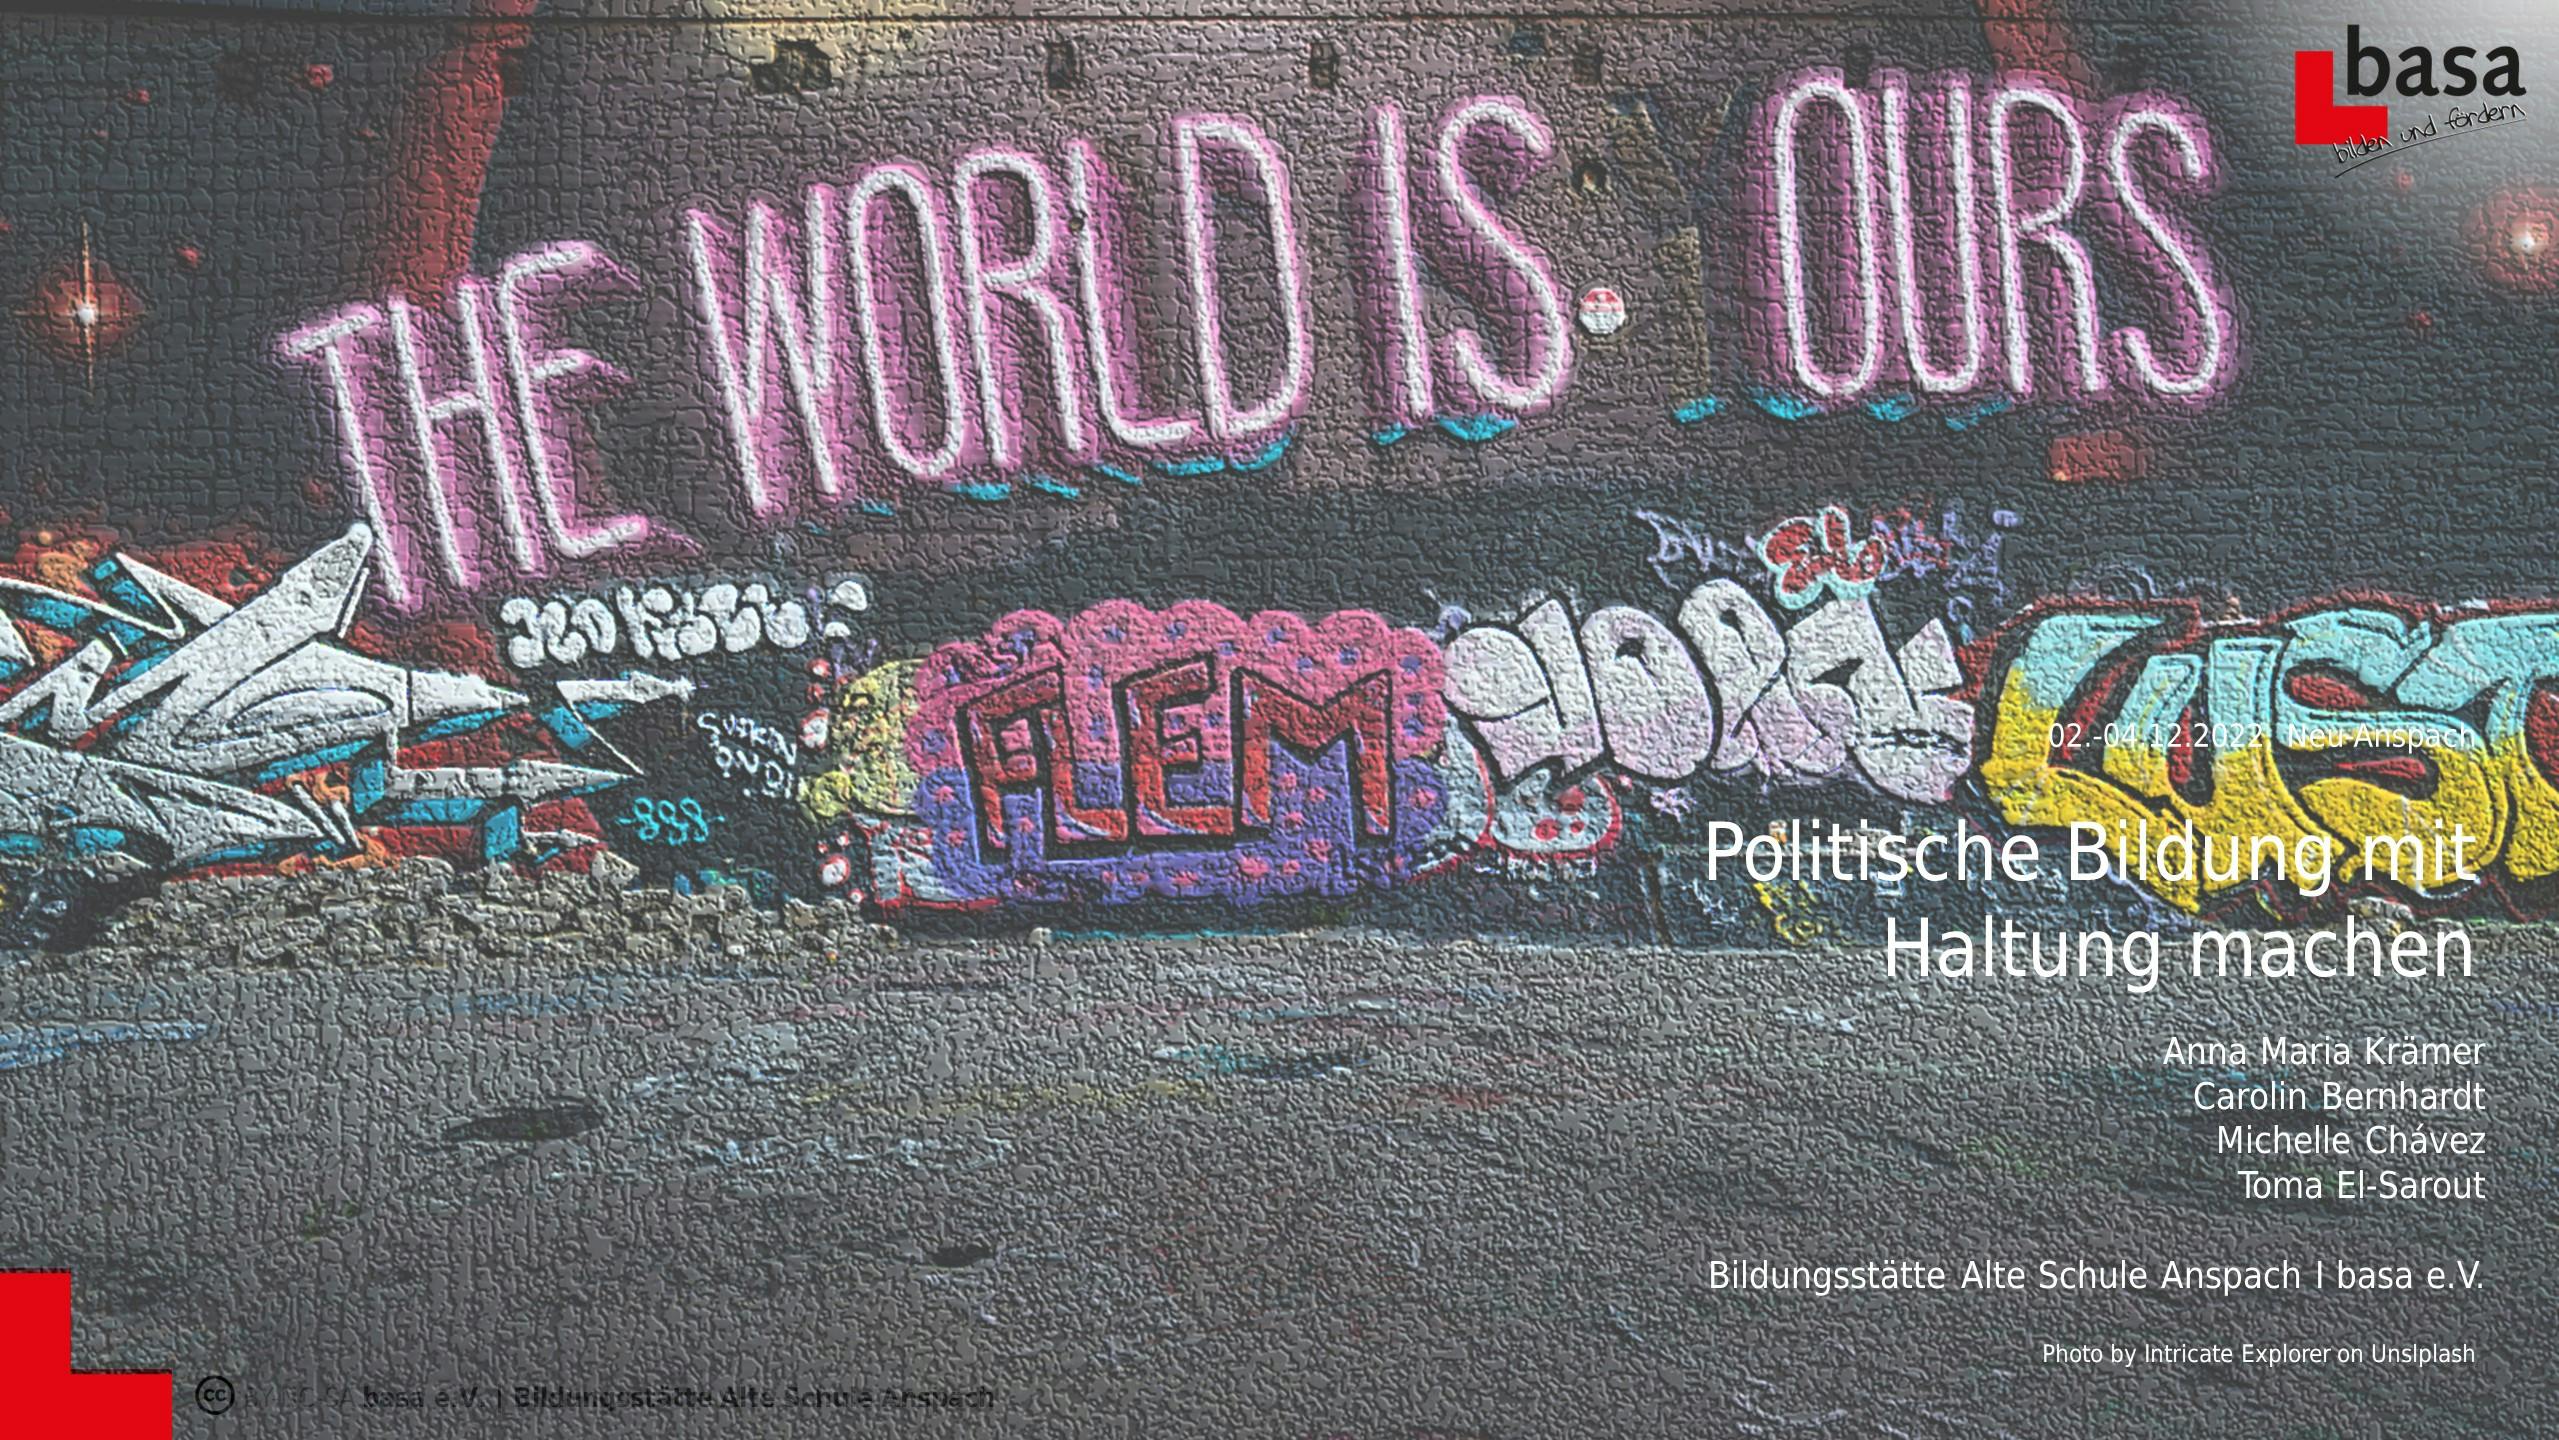 On the picture there is a graffiti saying The World is Yours. The letters are drawn like neon lights and the 'y' in yours is not working so that the graffiti has a second meaning which is The World is Ours. 